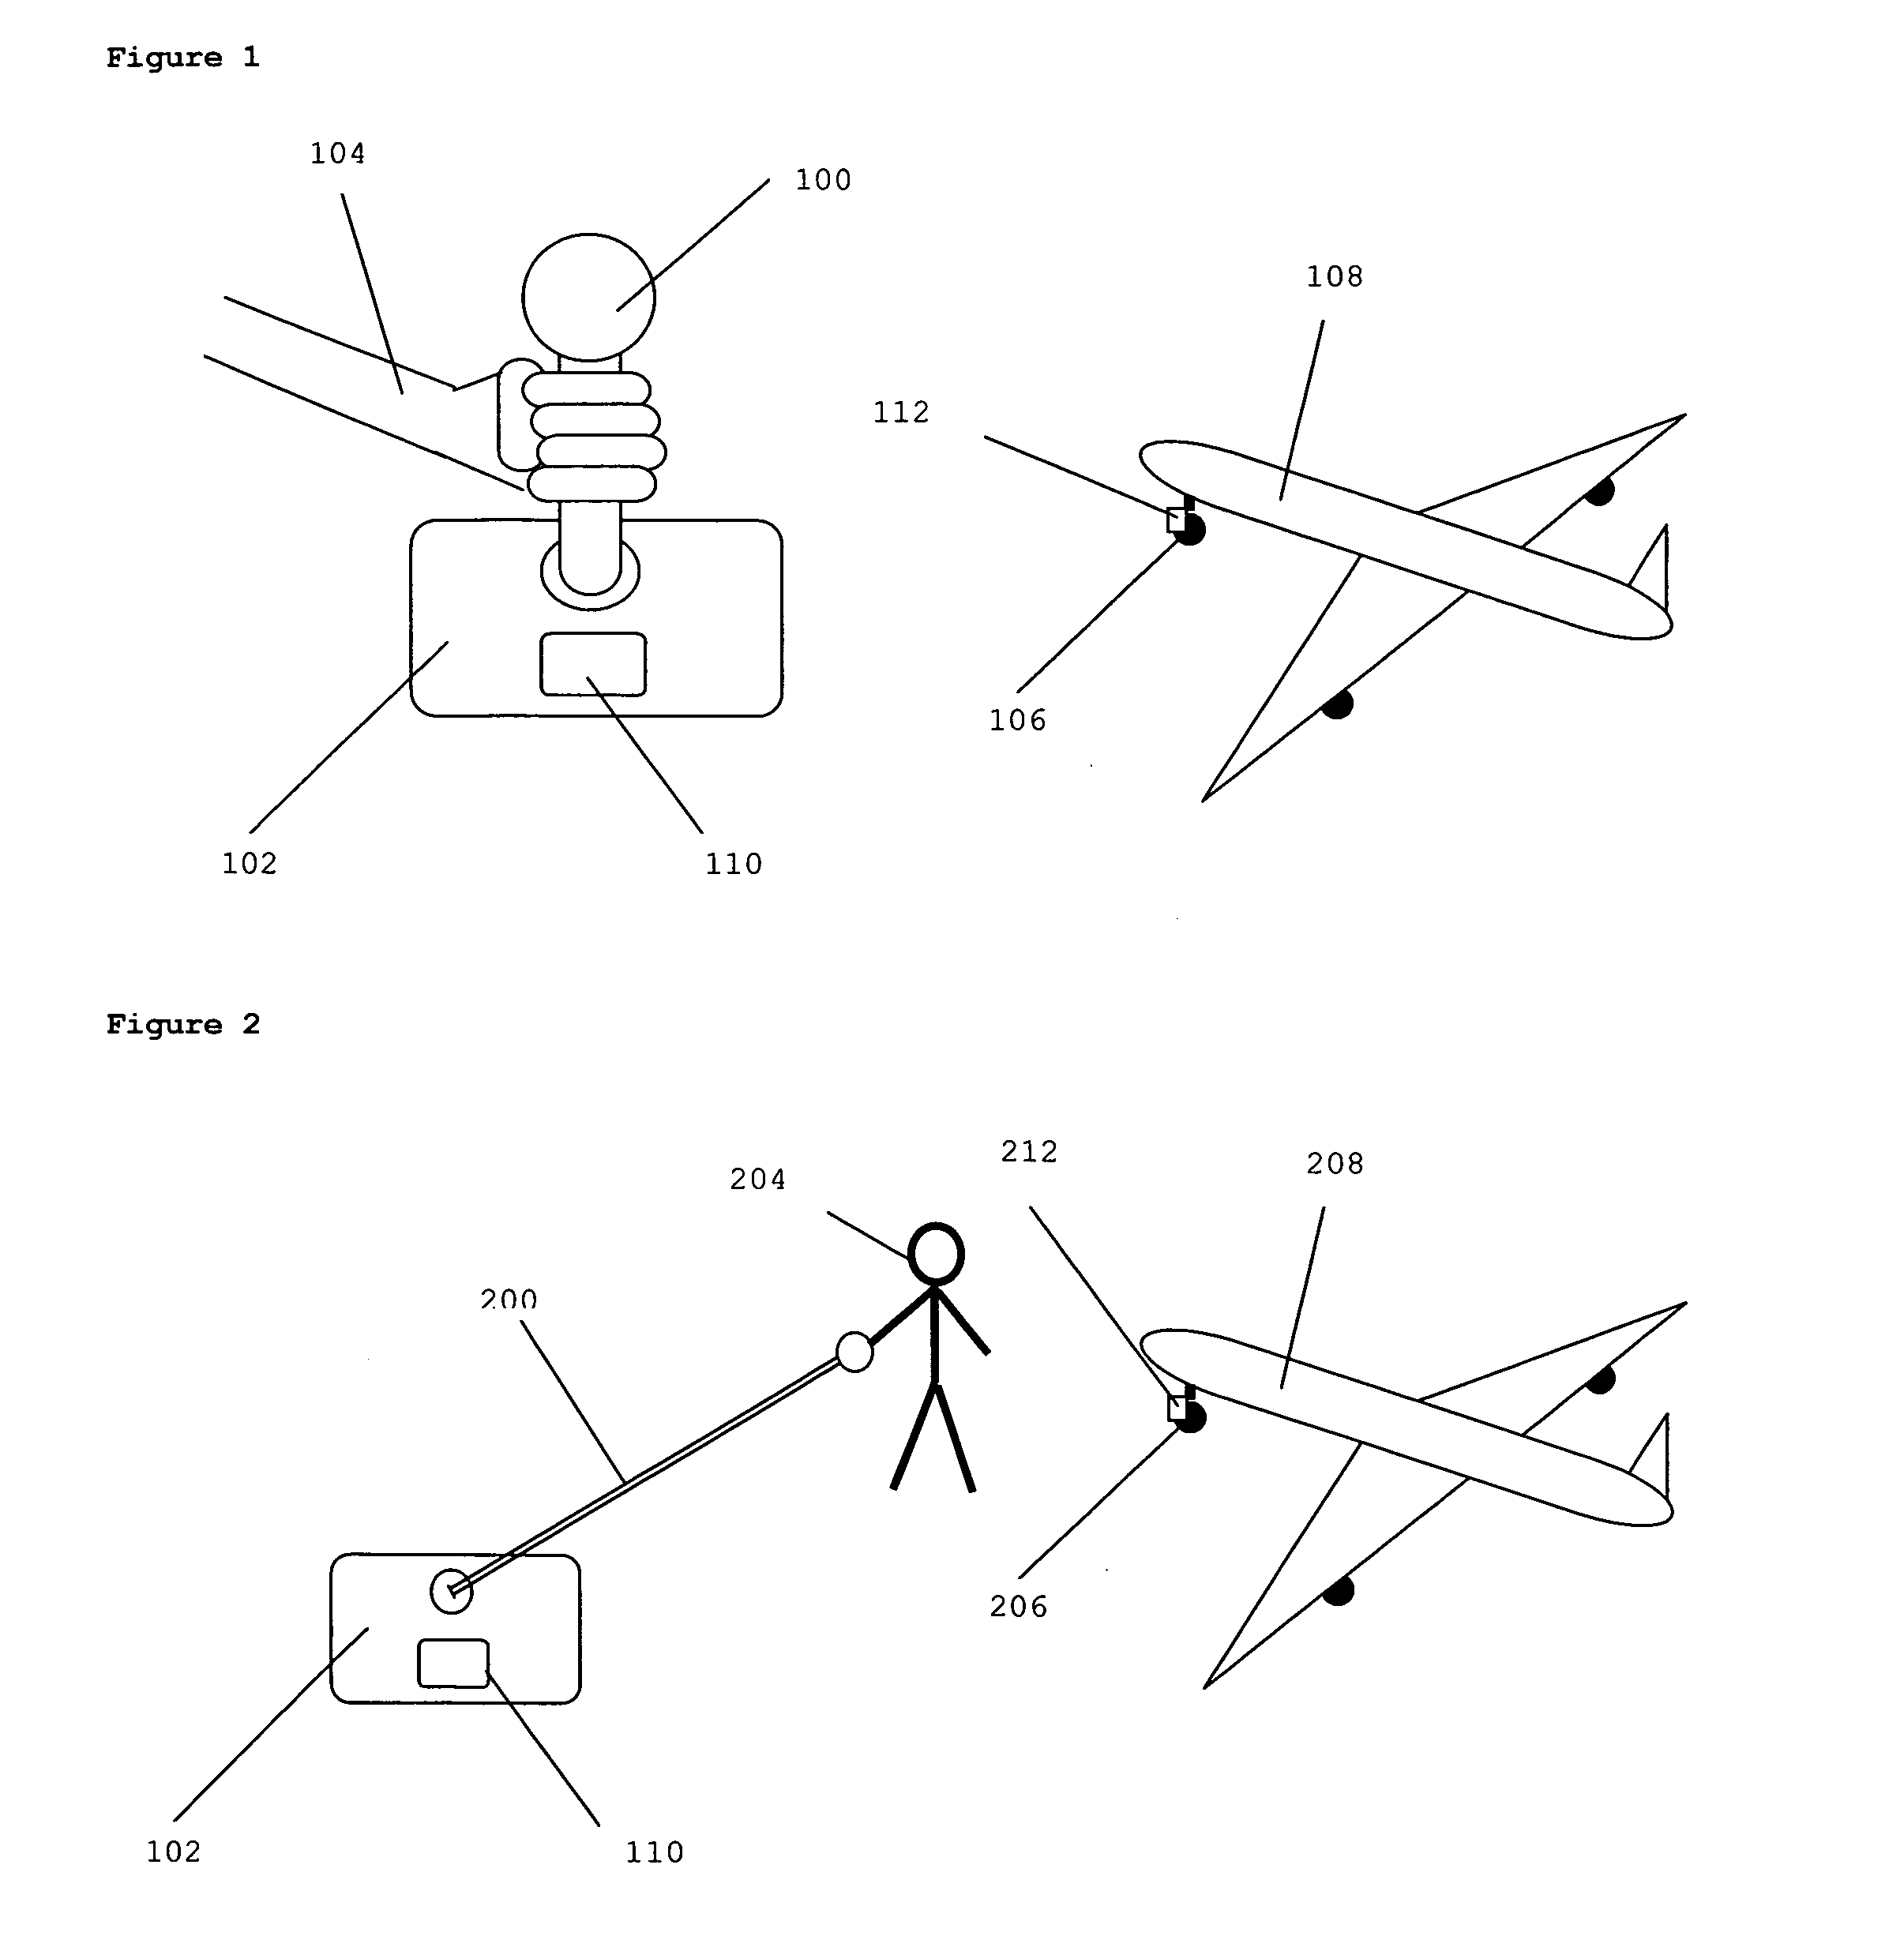 Apparatus for controlling aircraft ground movement